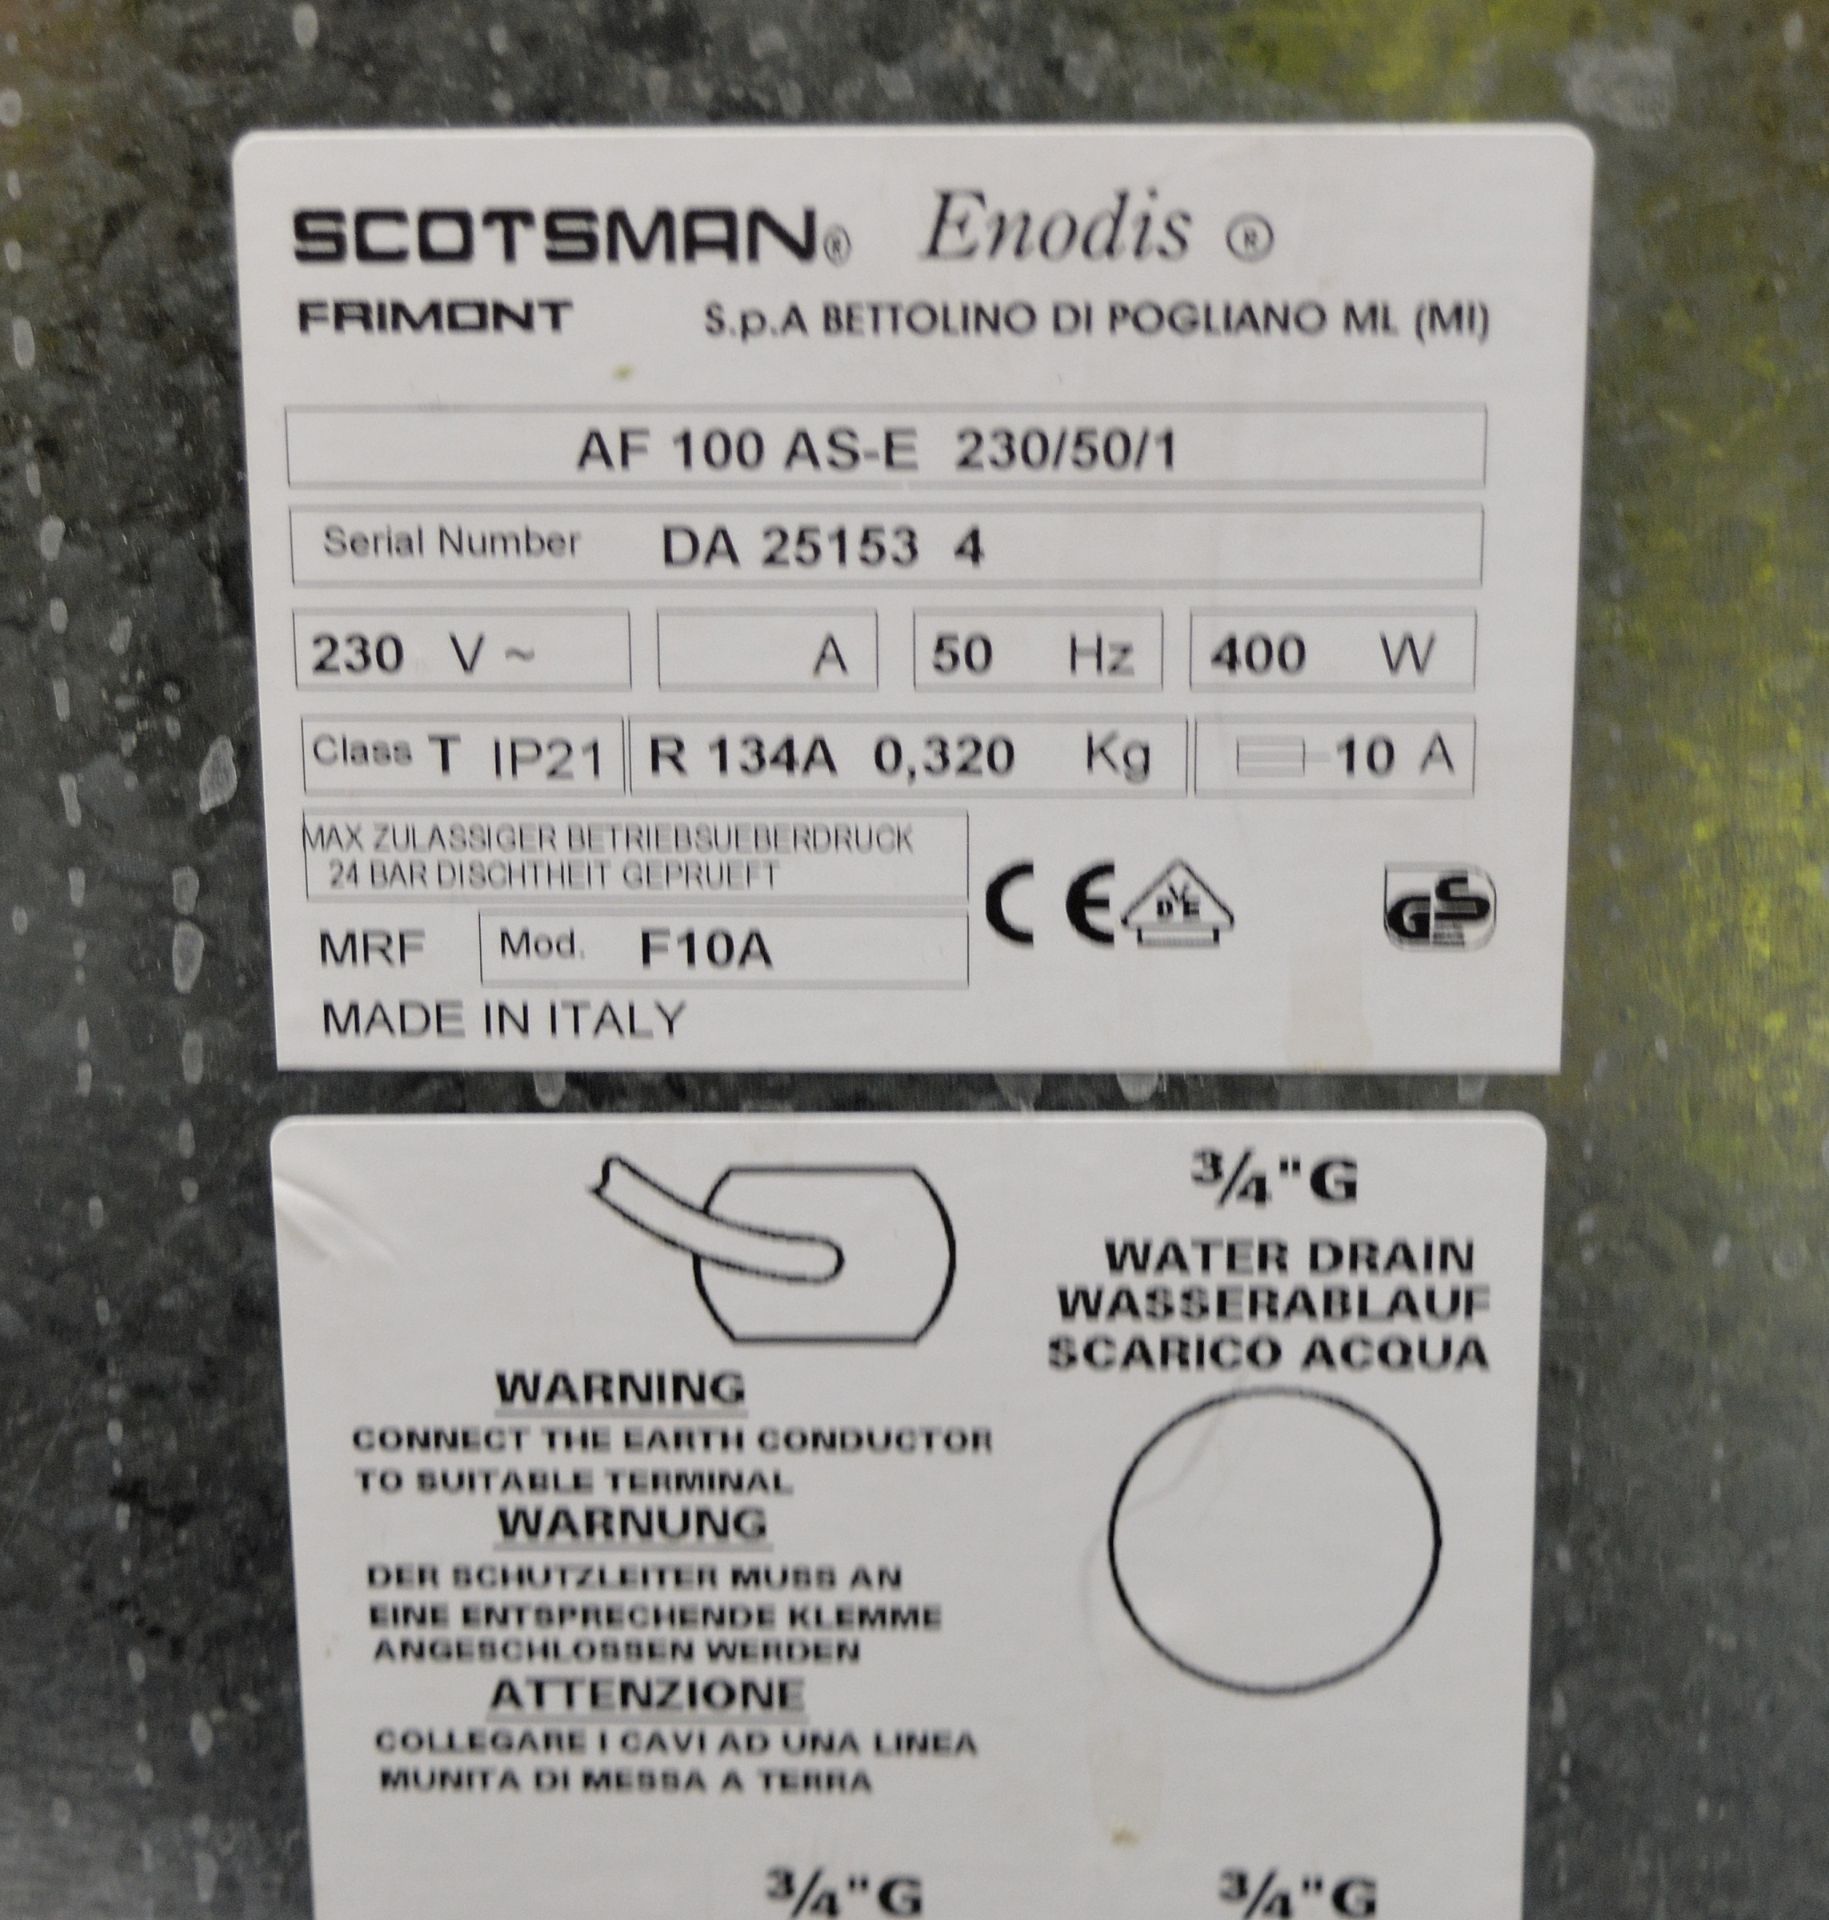 Scotsman AF 100 AS-E 230/50/1 Ice Flaker Machine with Stand, single phase electric - Image 6 of 7